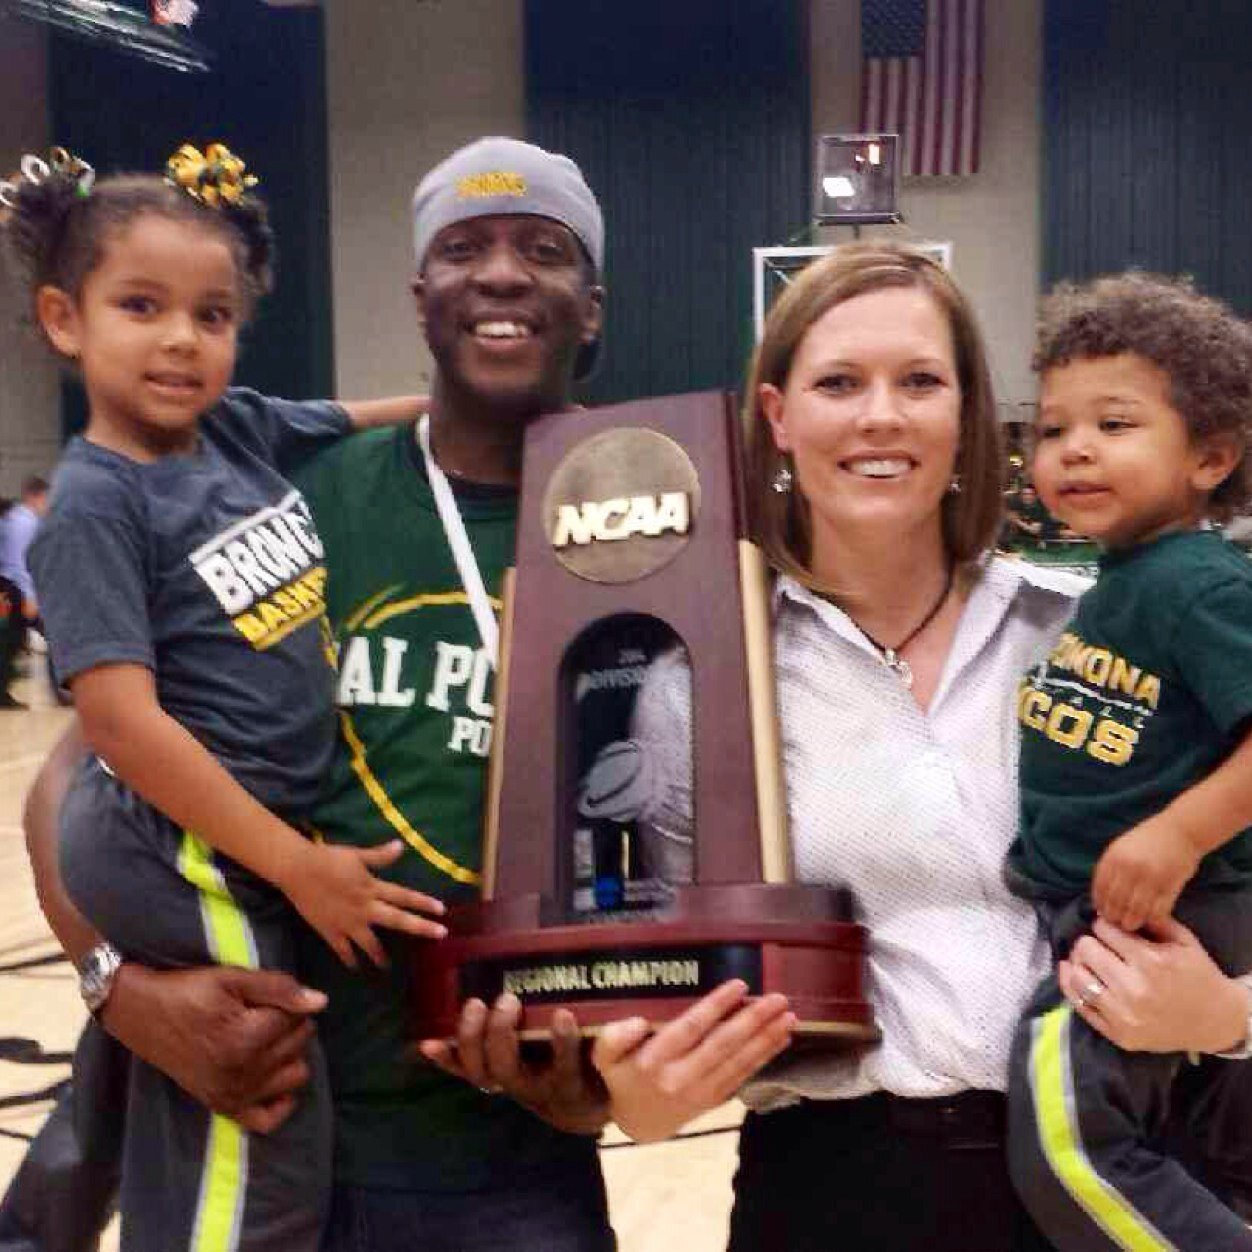 God 1st, Wife, Mother, Cal Poly Pomona Head Women's Basketball Coach, humbled Phil 4:13.     Views are my own